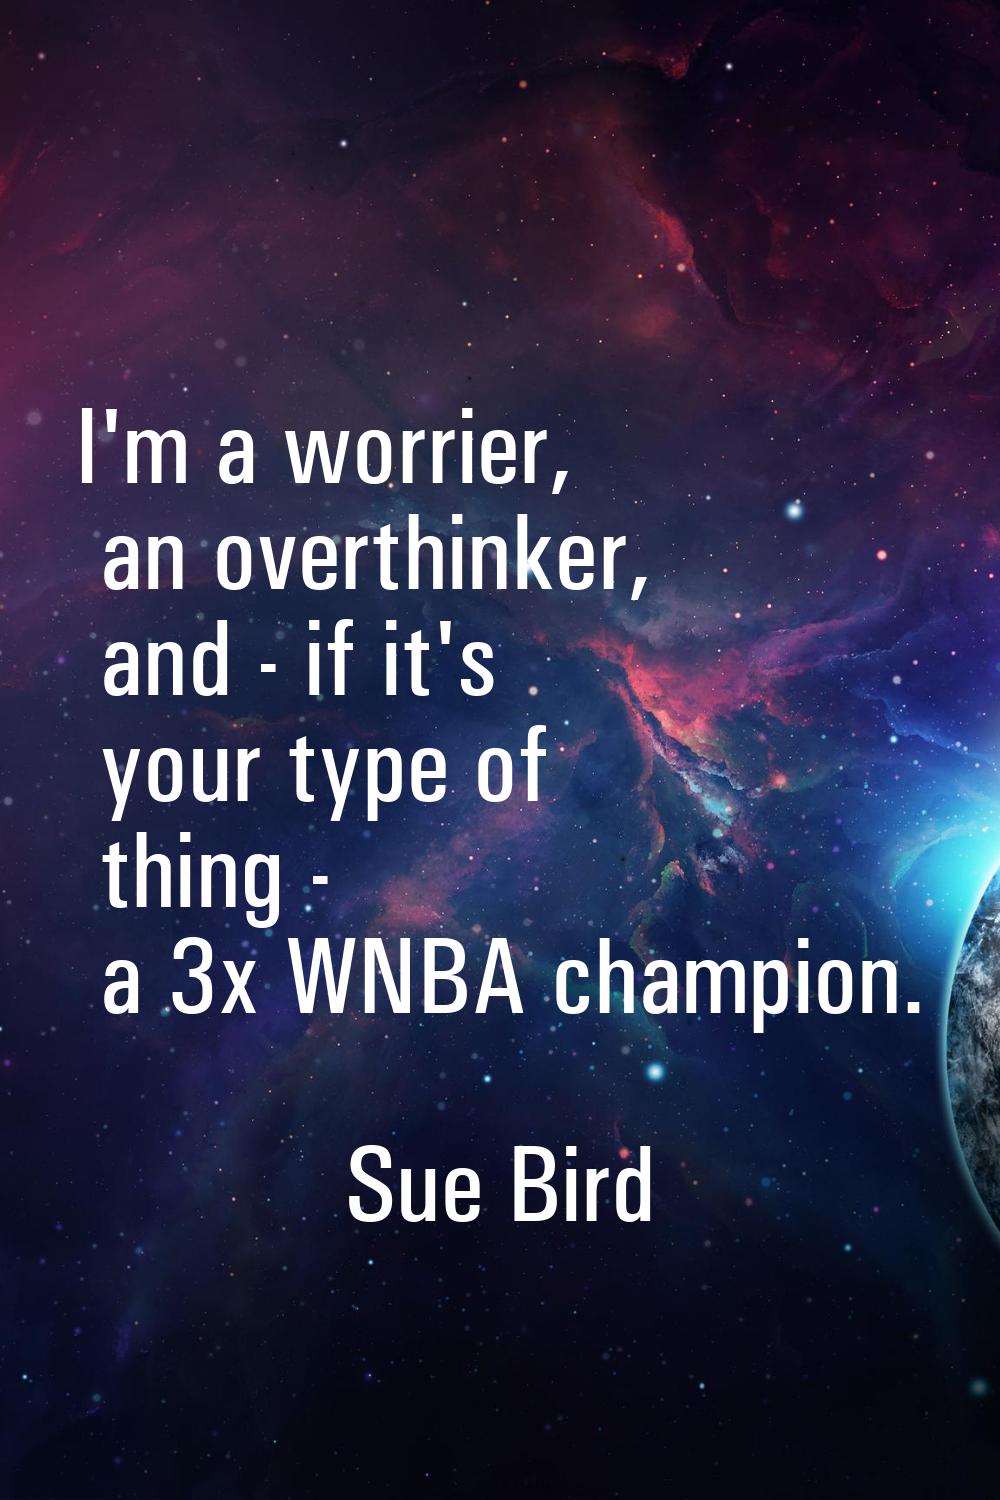 I'm a worrier, an overthinker, and - if it's your type of thing - a 3x WNBA champion.